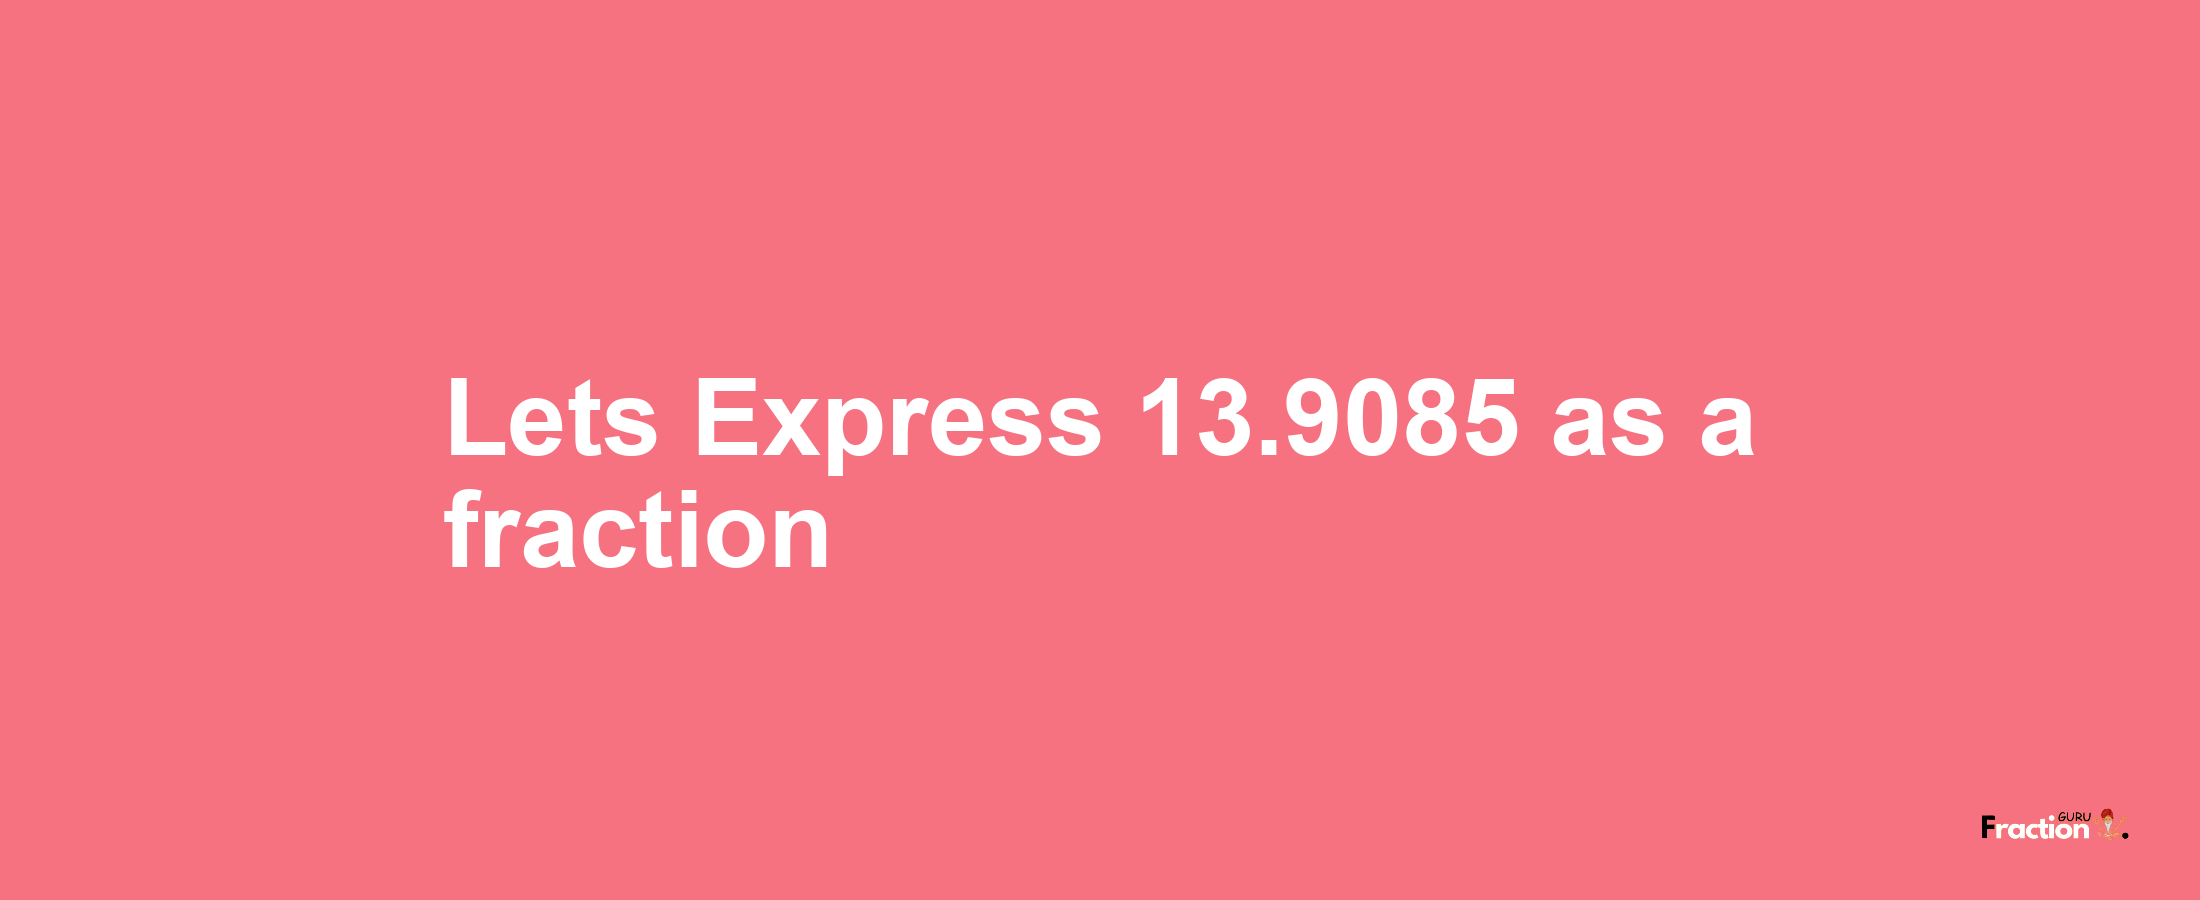 Lets Express 13.9085 as afraction